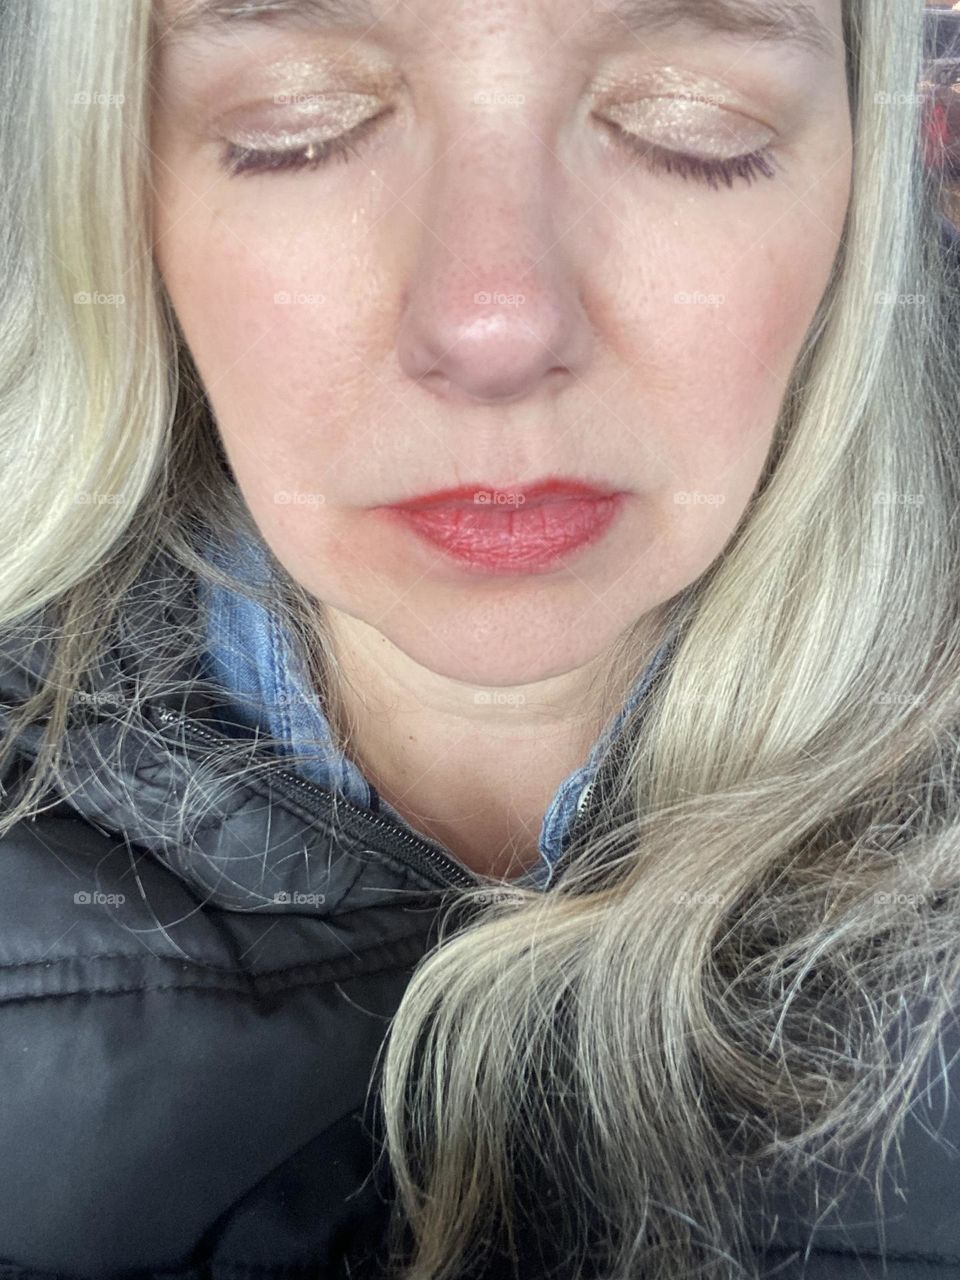 A selfie of me with my eyes closed to show my lids colored with a gold eyeshadow. I am wearing a Bare Minerals shade called “Queen Phyllis.” My lipstick is also Bare Minerals, Matte Liquid Lipcolor in “Fire.”